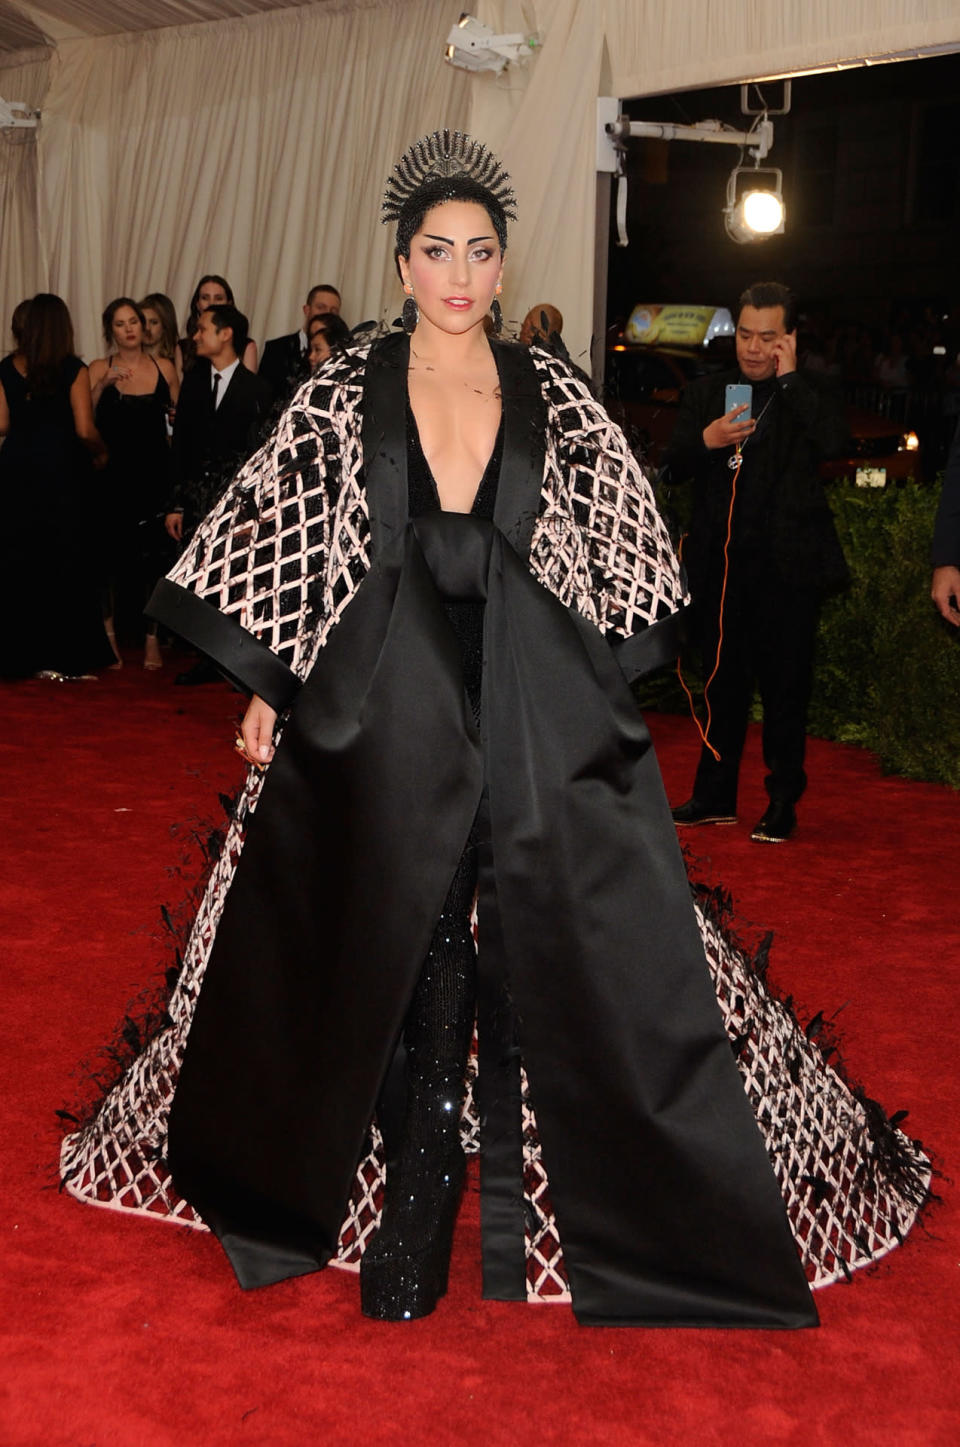 <p>At the ball honoring the Costume Institute’s “China: Through The Looking Glass” exhibition, Gaga walked the red carpet with her dress’ designer, Alexander Wang. <i>Photo: Getty Images </i></p>